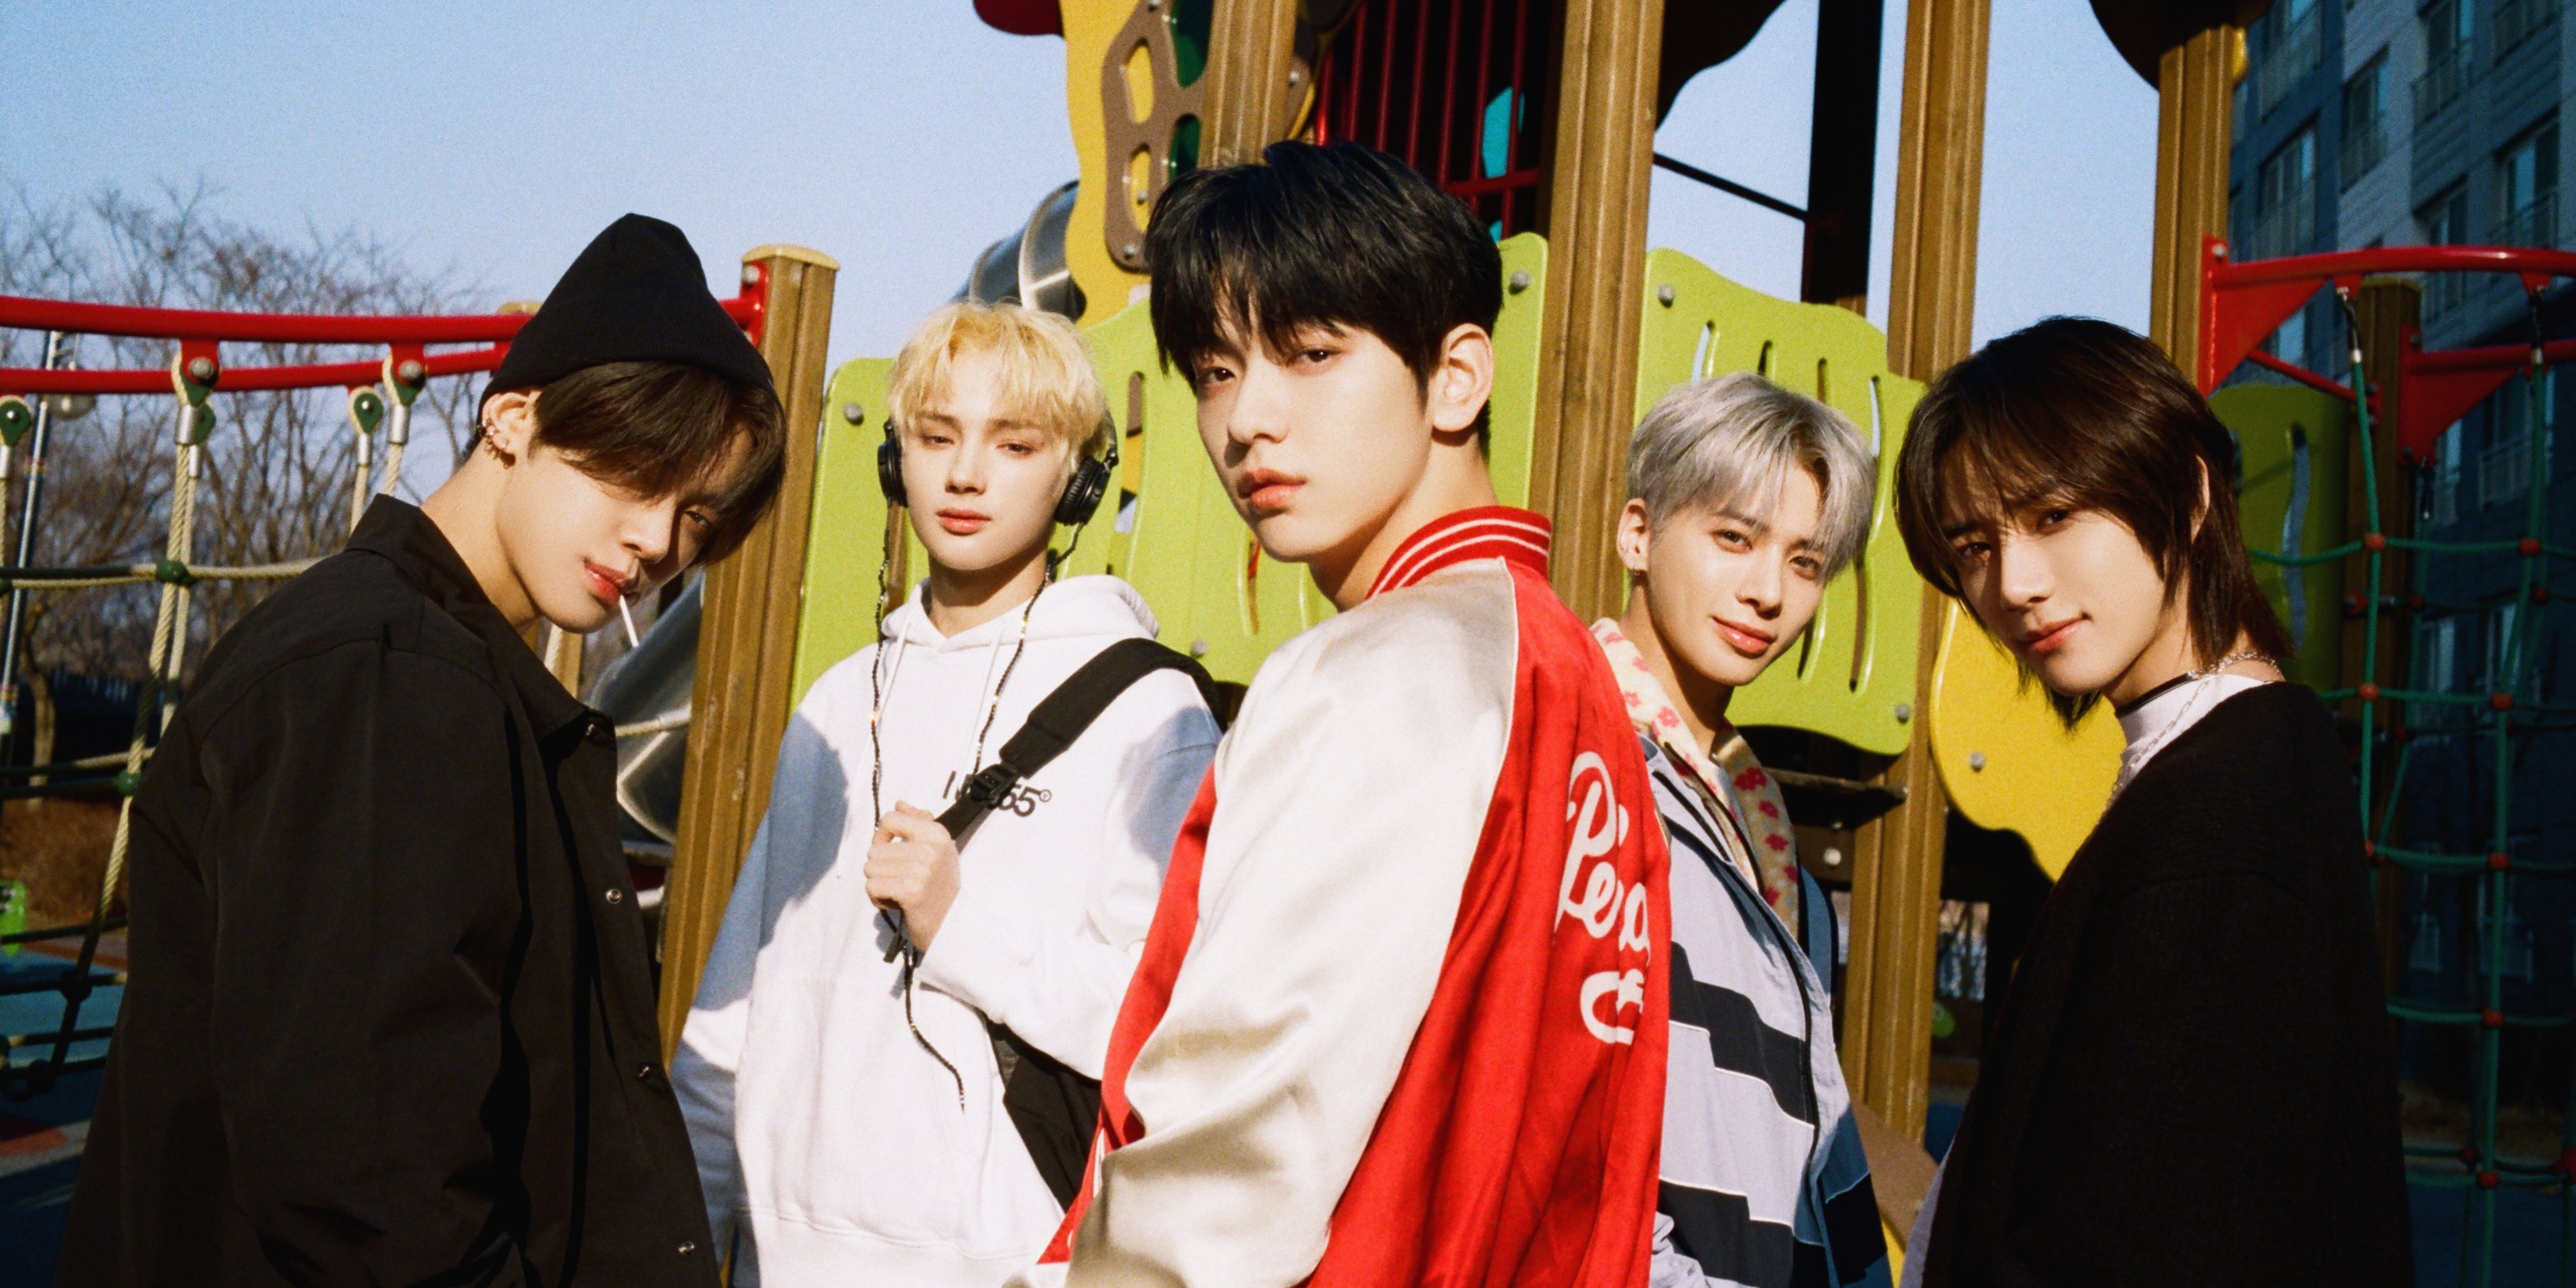 TXT unveil new era with latest album 'The Chaos Chapter: FREEZE' featuring collaborations with BTS' RM, Seori, Ashnikko, and more – listen